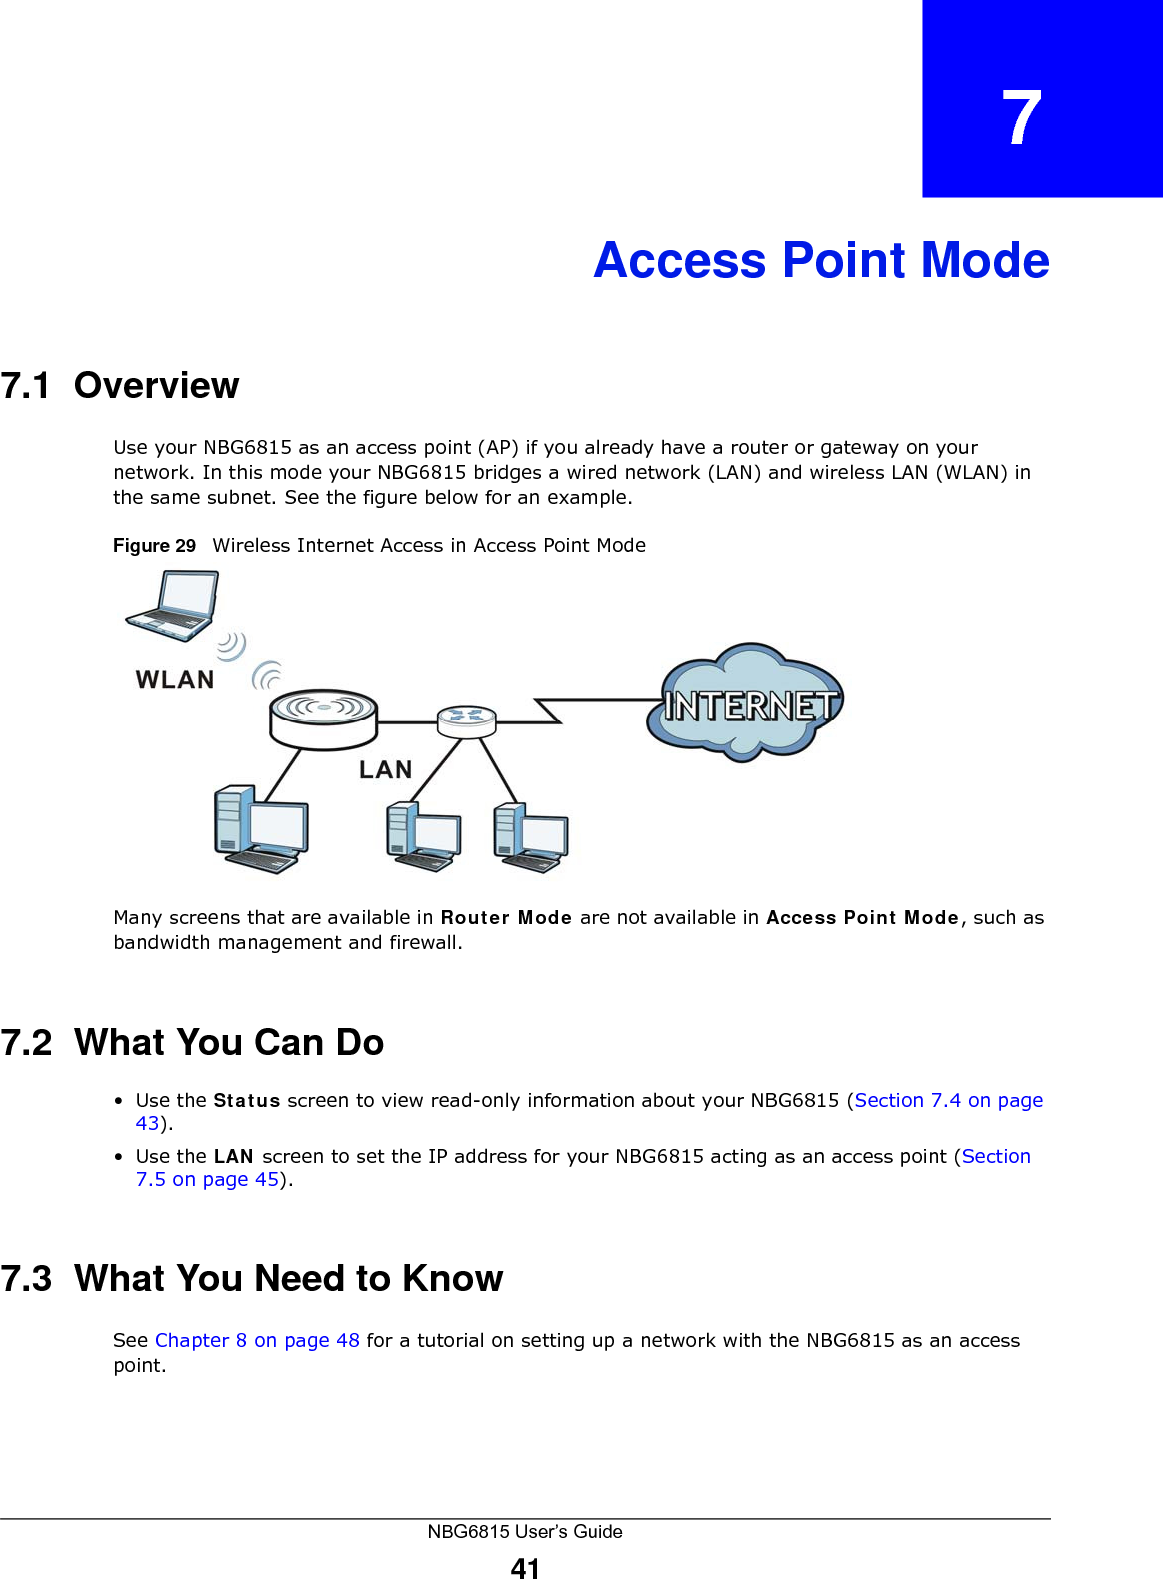 NBG6815 User’s Guide41CHAPTER   7Access Point Mode7.1  OverviewUse your NBG6815 as an access point (AP) if you already have a router or gateway on your network. In this mode your NBG6815 bridges a wired network (LAN) and wireless LAN (WLAN) in the same subnet. See the figure below for an example.Figure 29   Wireless Internet Access in Access Point Mode Many screens that are available in Router Mode are not available in Access Point Mode, such as bandwidth management and firewall.7.2  What You Can Do•Use the Status screen to view read-only information about your NBG6815 (Section 7.4 on page 43).•Use the LAN screen to set the IP address for your NBG6815 acting as an access point (Section 7.5 on page 45).7.3  What You Need to KnowSee Chapter 8 on page 48 for a tutorial on setting up a network with the NBG6815 as an access point.